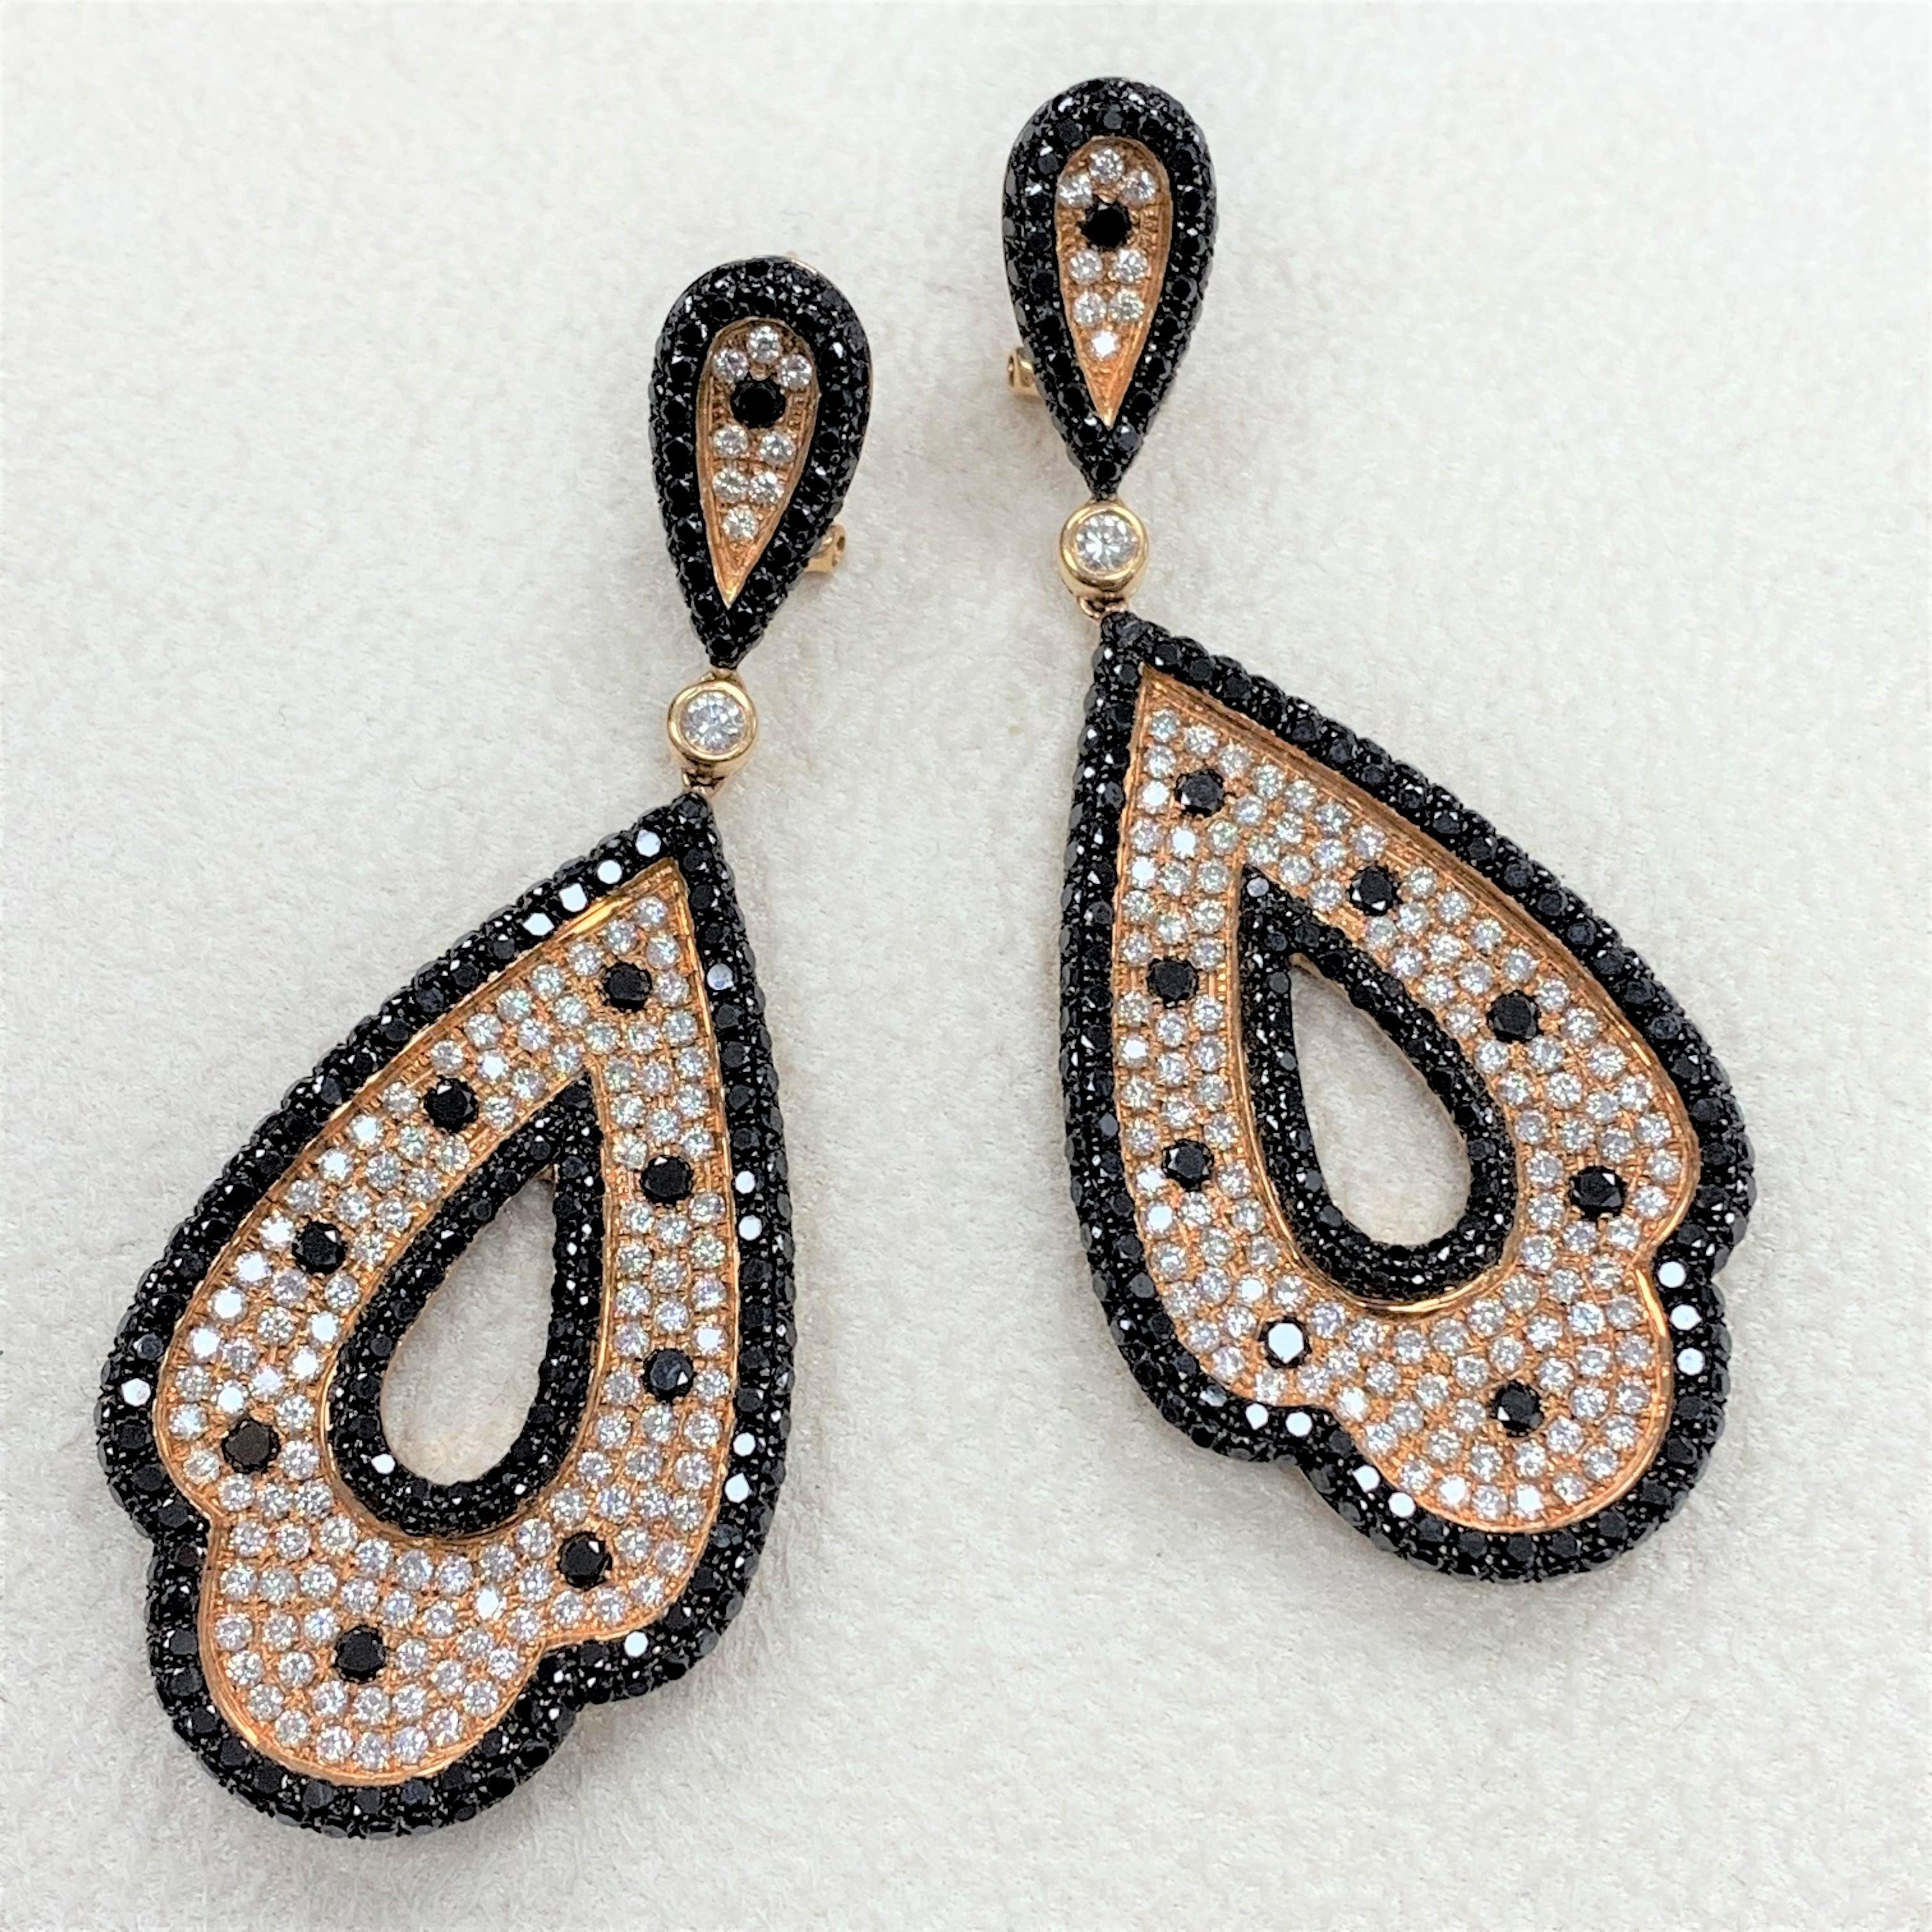 Contemporary Beauvince Black and White Diamond Large Dangle Earrings in Rose Gold